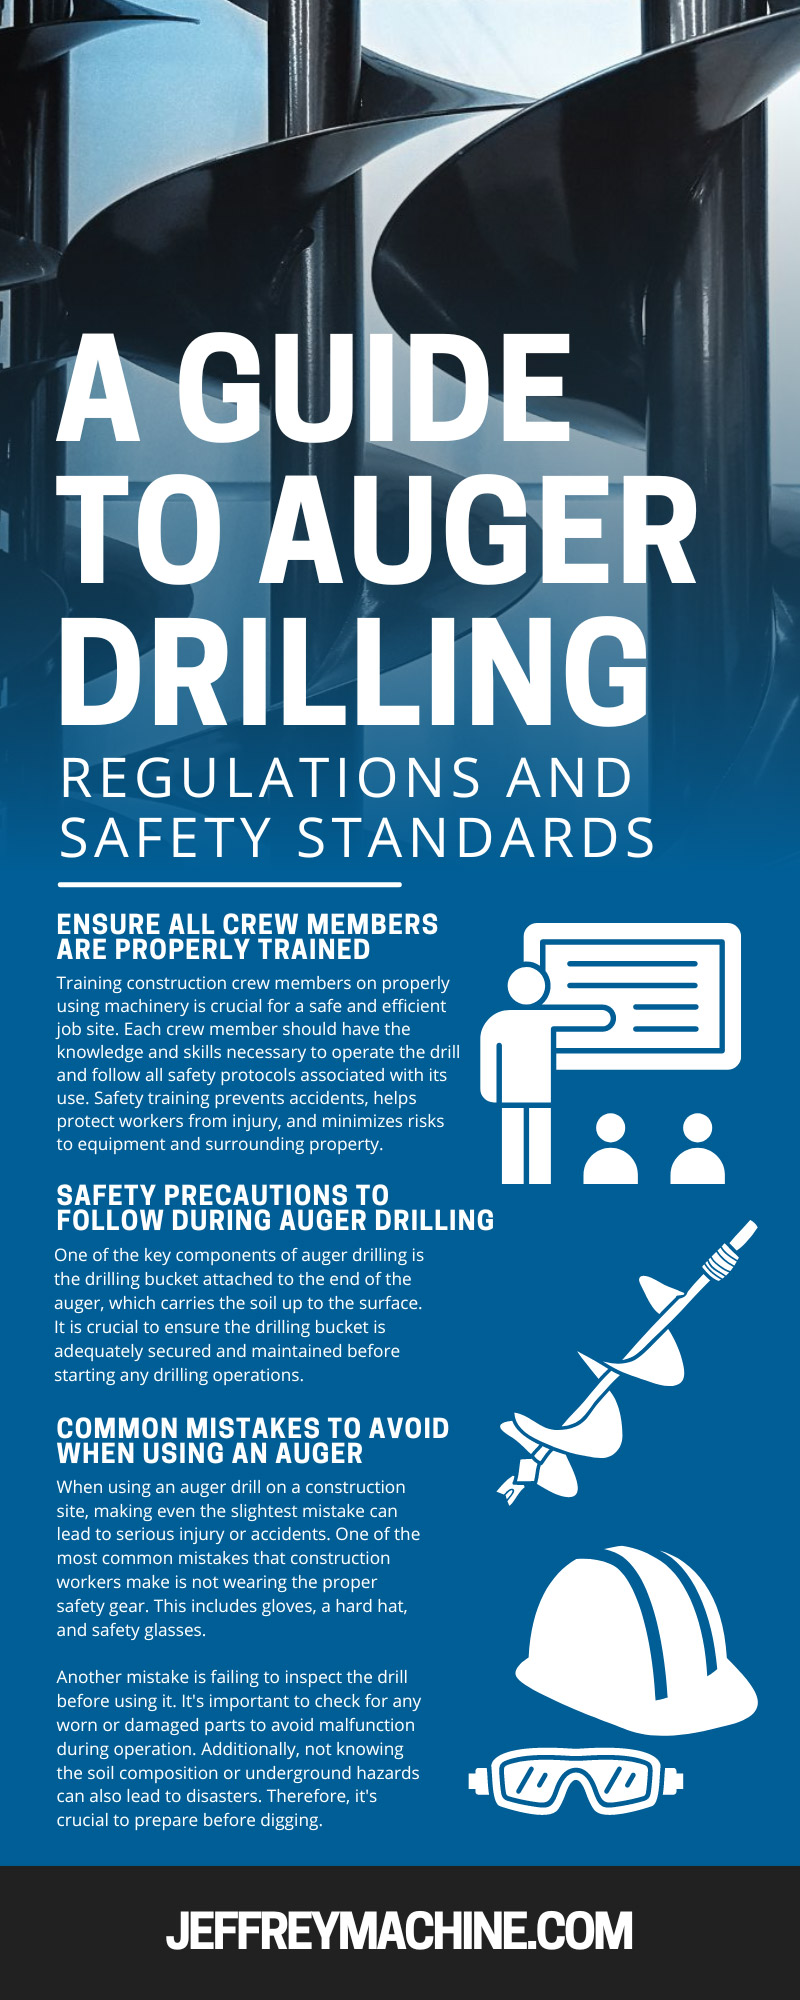 A Guide to Auger Drilling Regulations and Safety Standards